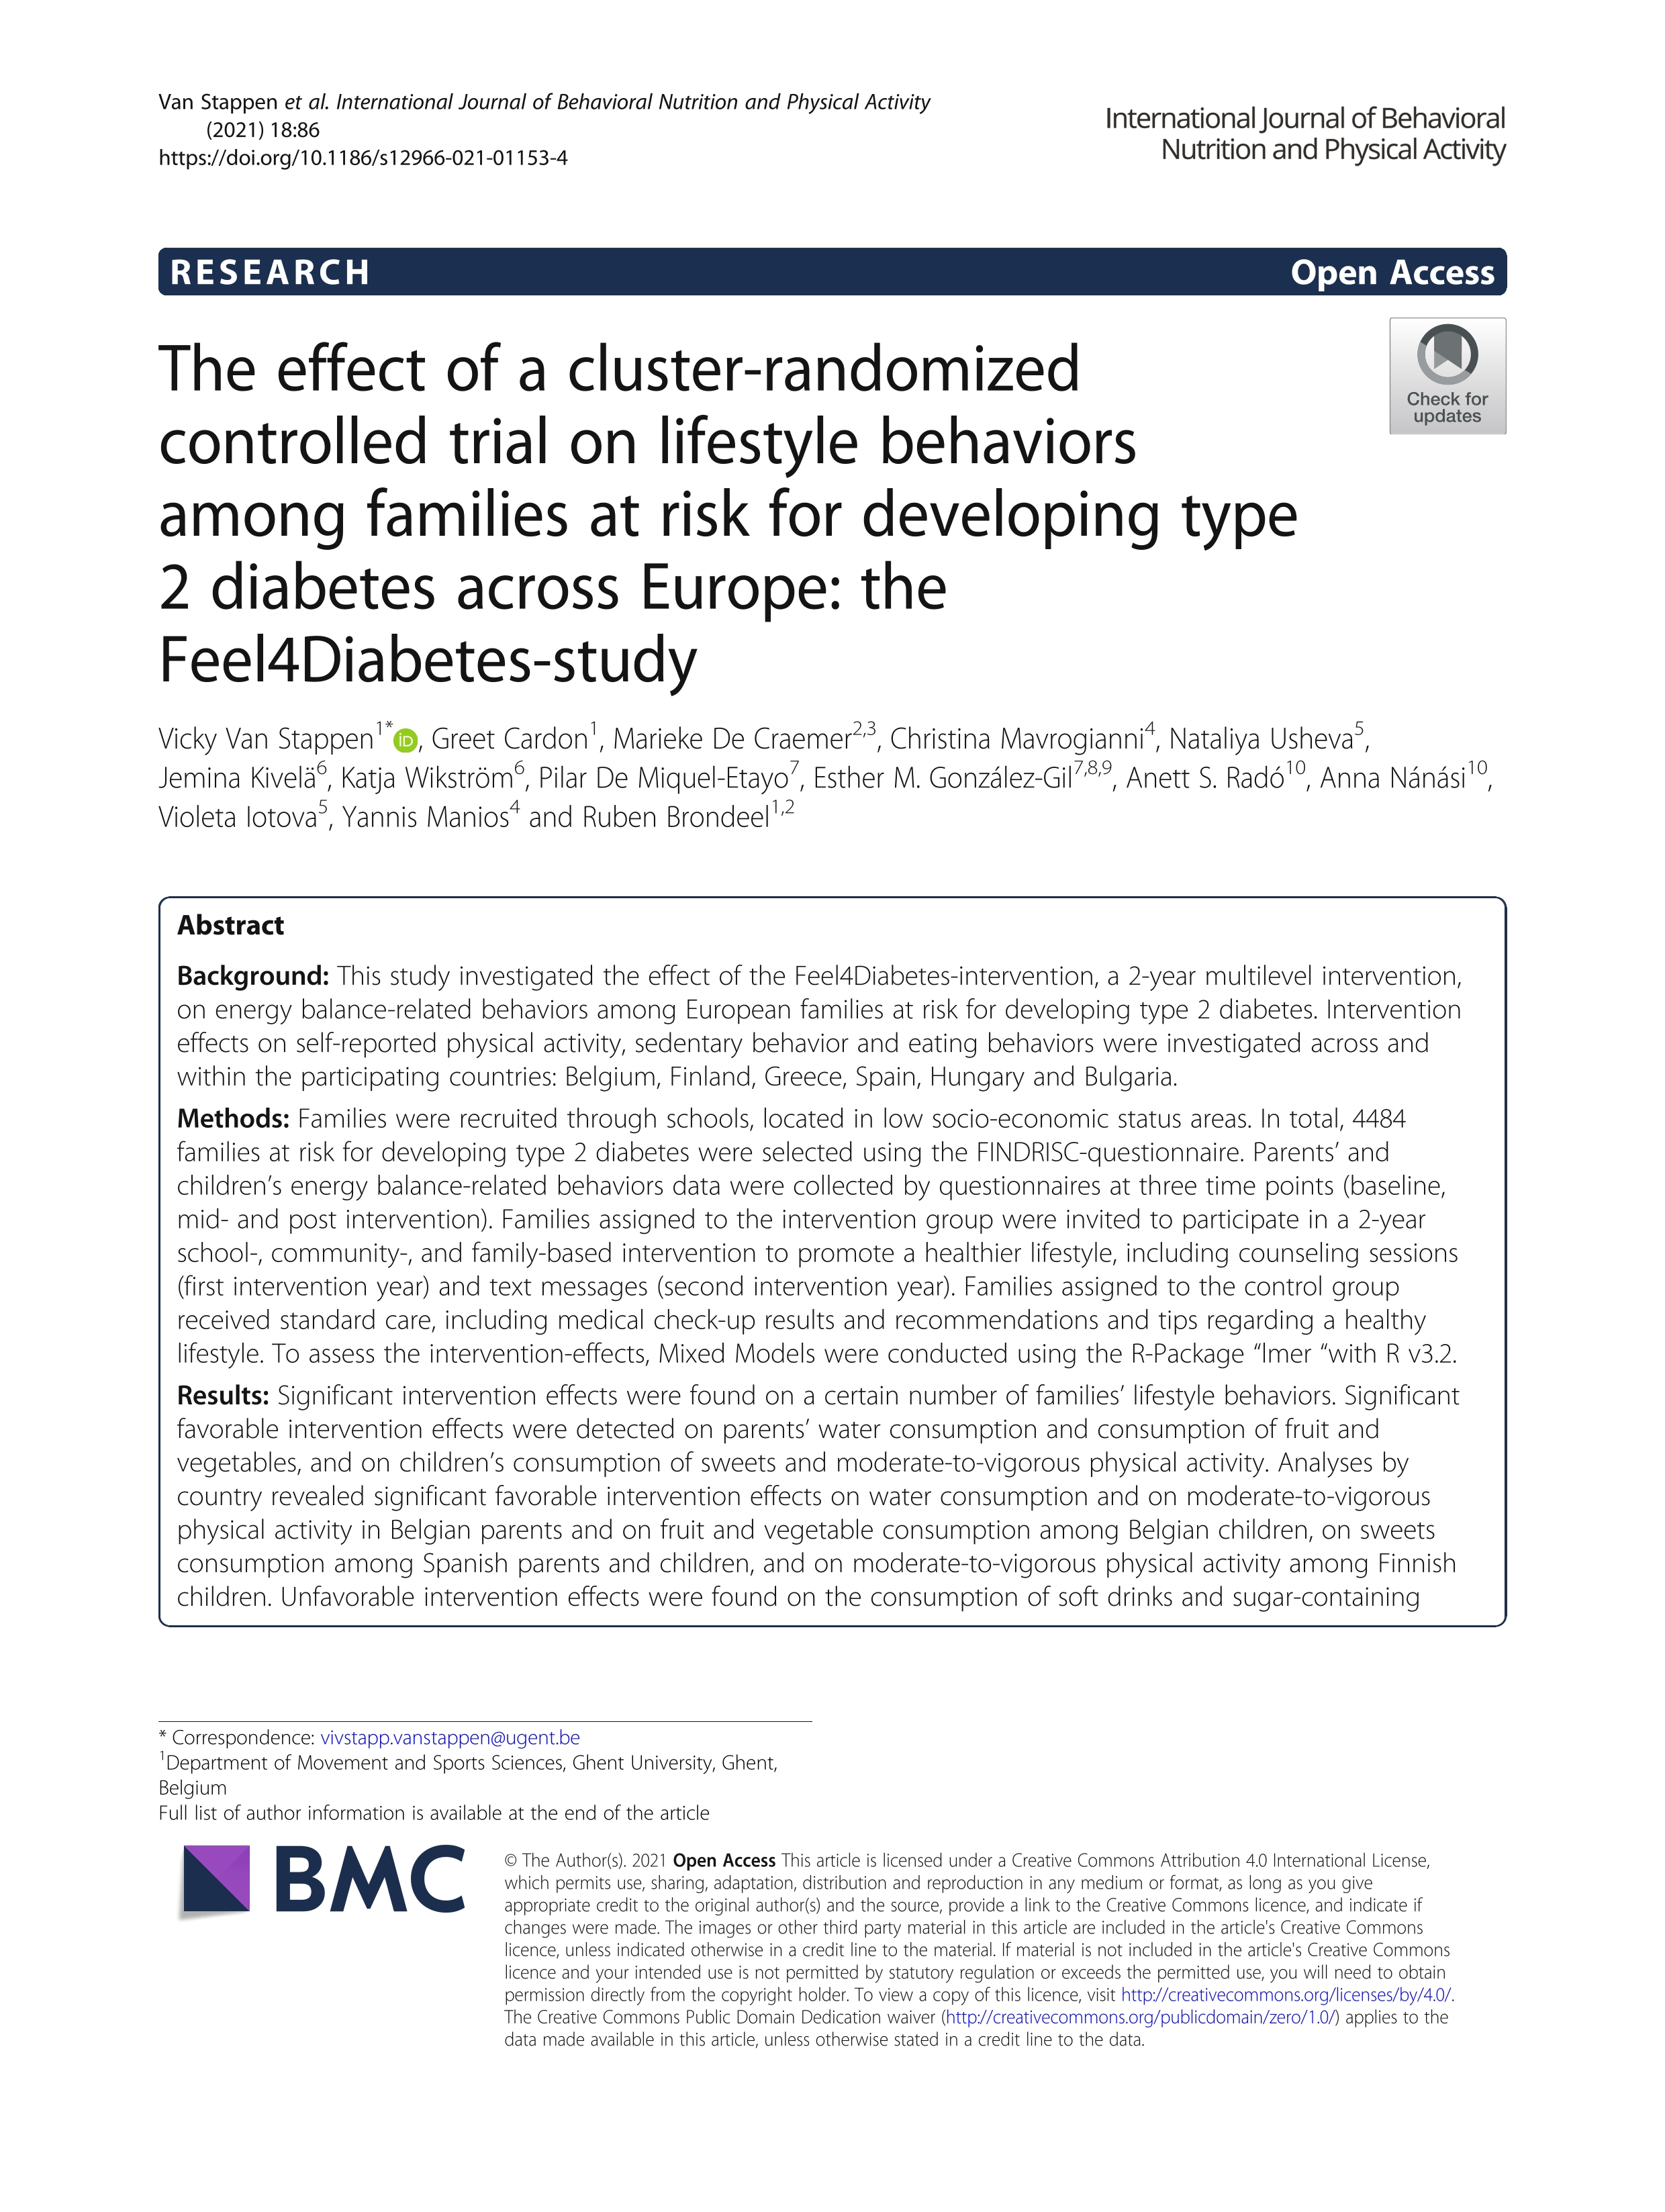 The effect of a cluster-randomized controlled trial on lifestyle behaviors among families at risk for developing type 2 diabetes across Europe: the Feel4Diabetes-study